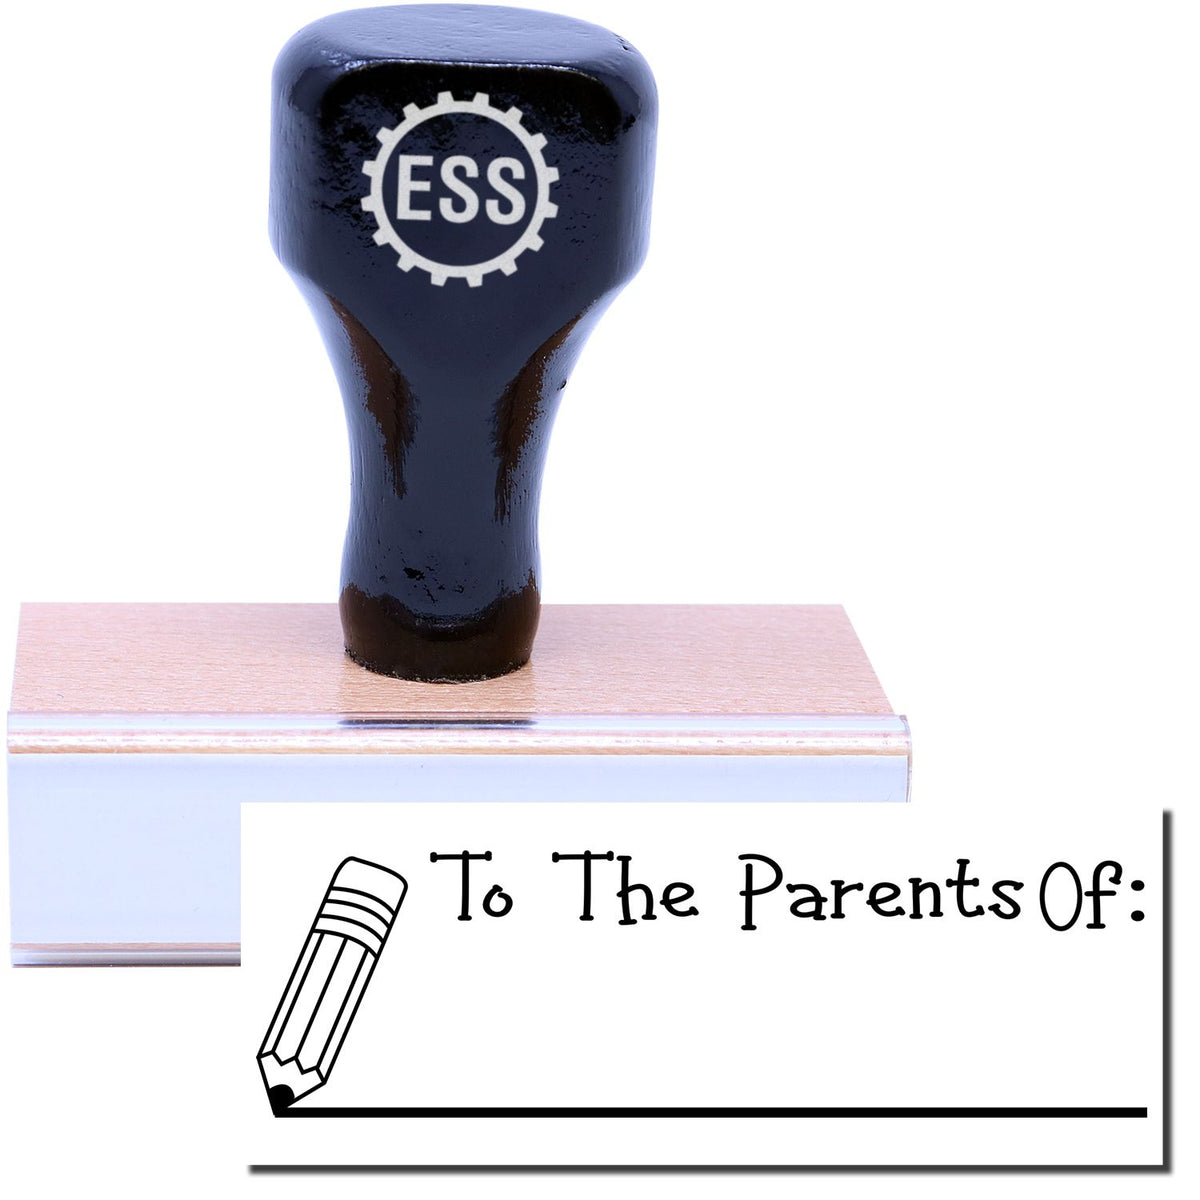 A stock office rubber stamp with a stamped image showing how the text &quot;To The Parents Of:&quot; in a large font with an image of a pencil next to the line is displayed after stamping.